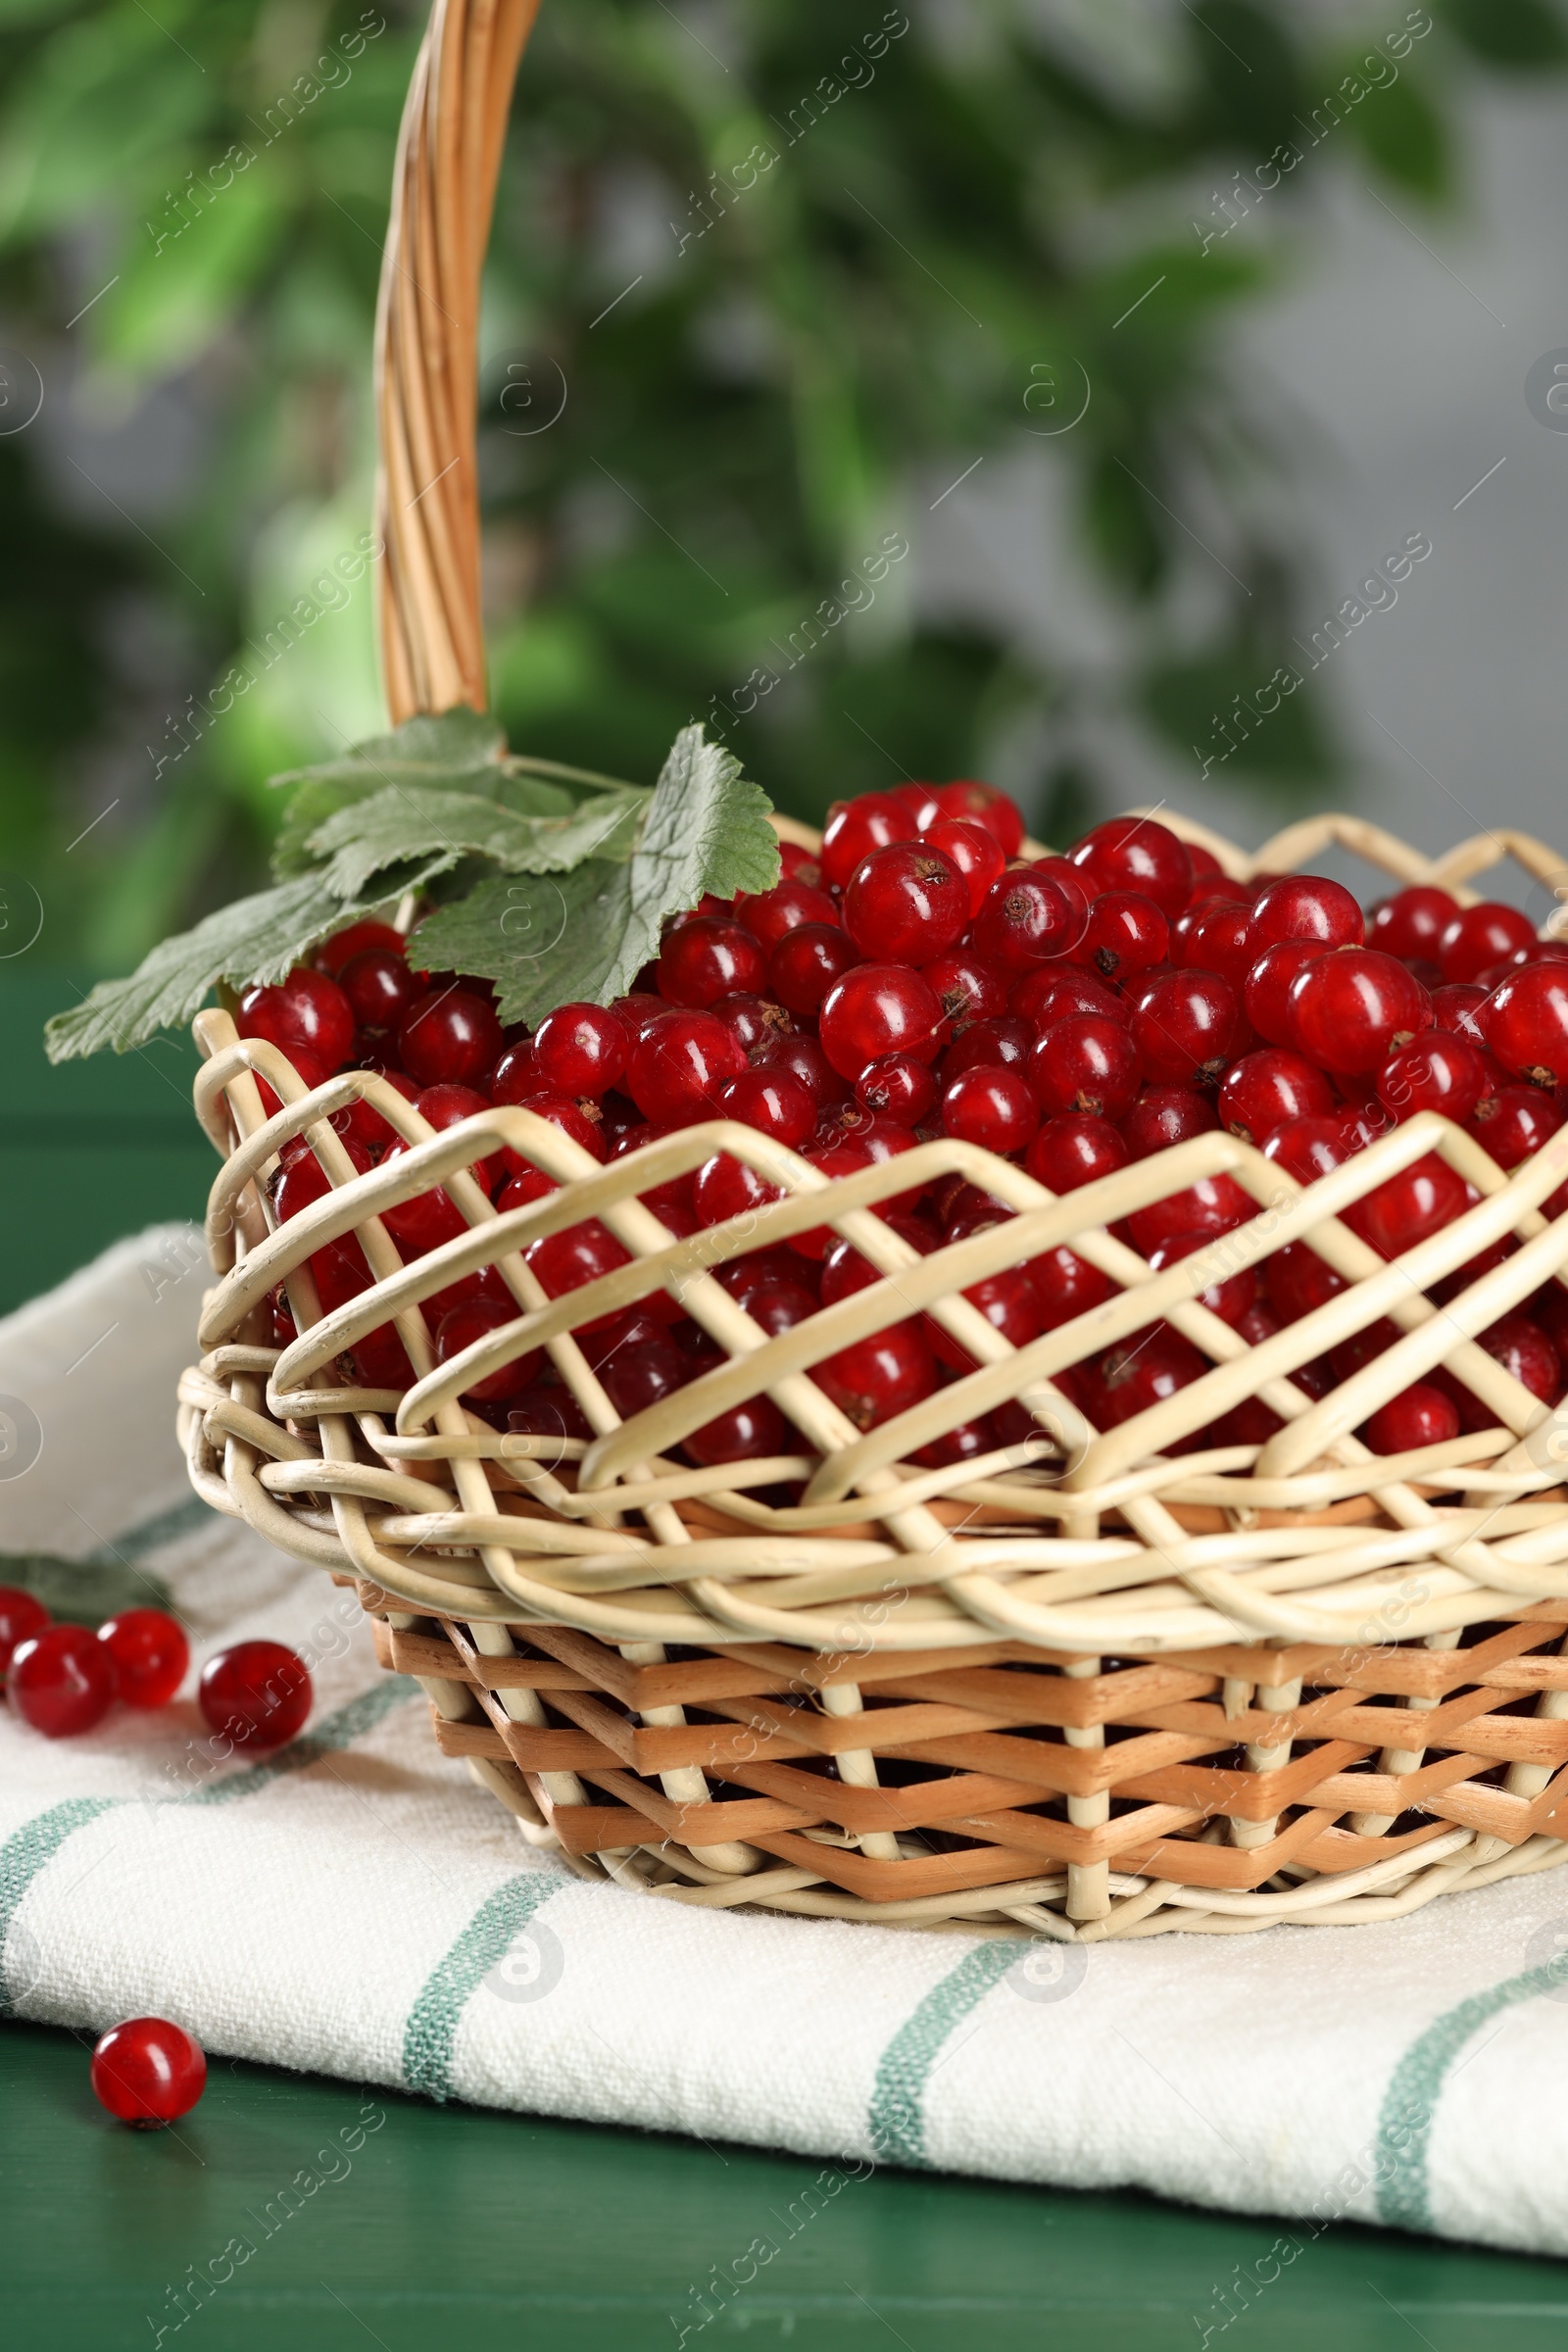 Photo of Ripe red currants and leaves in wicker basket on green table